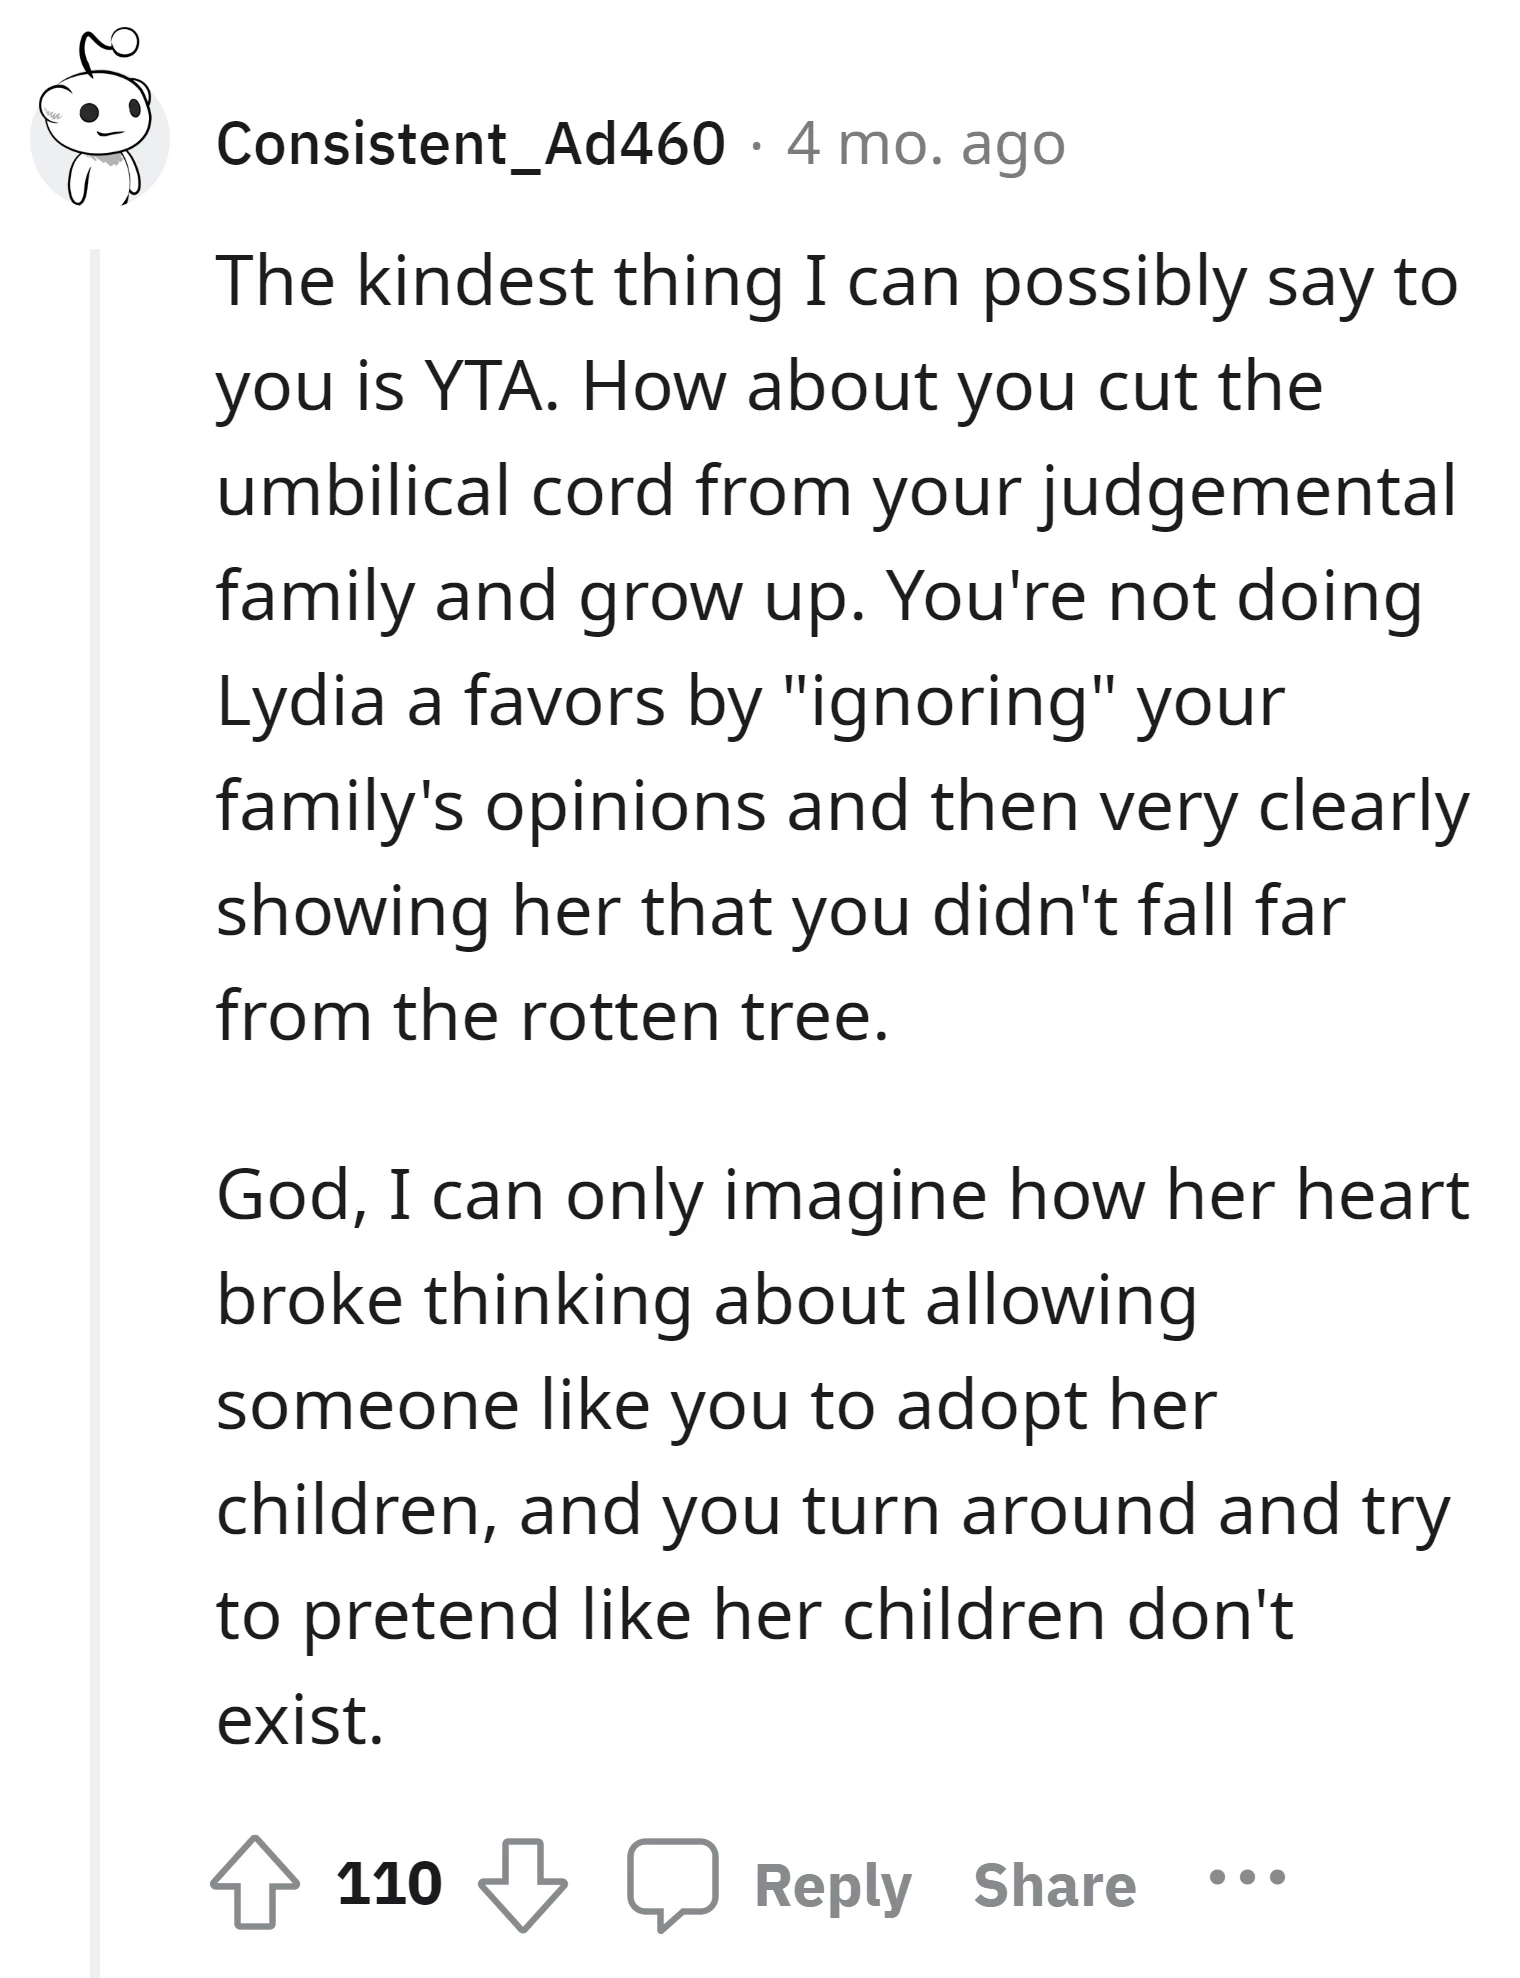 Redditor expresss empathy for Lydia's potential heartbreak over considering the OP to adopt her children